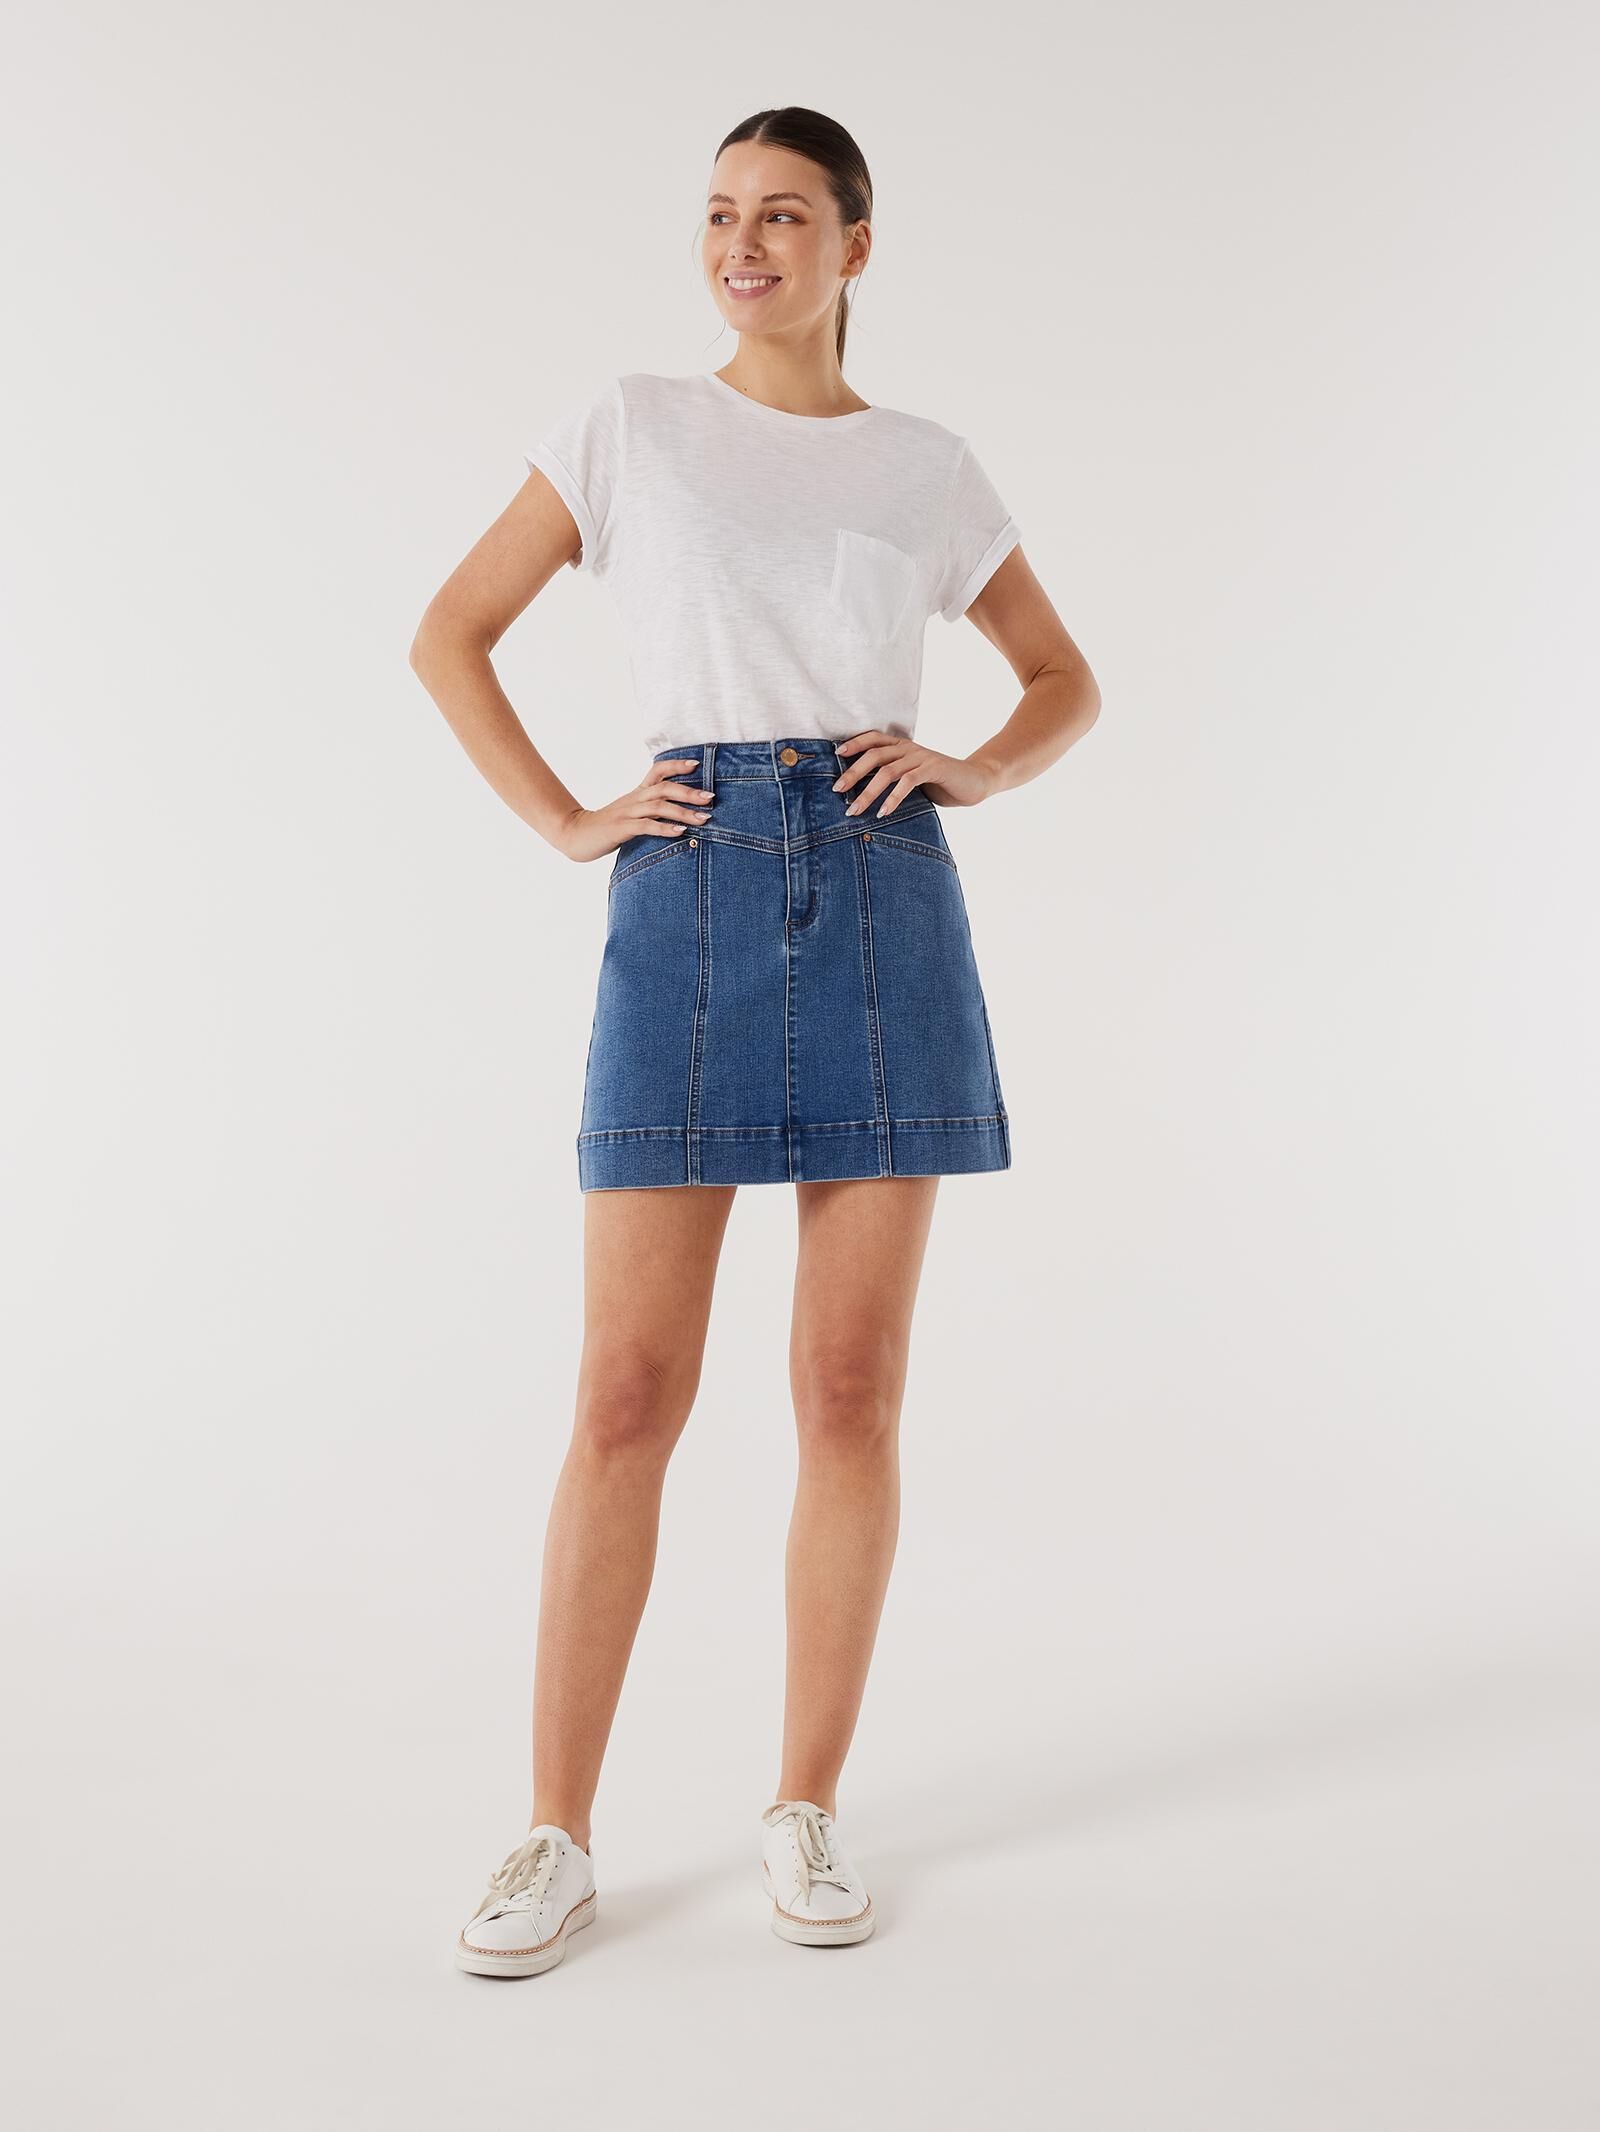 How to style a denim mini skirt for fall (when it's still warm outside) -  LaiaMagazine